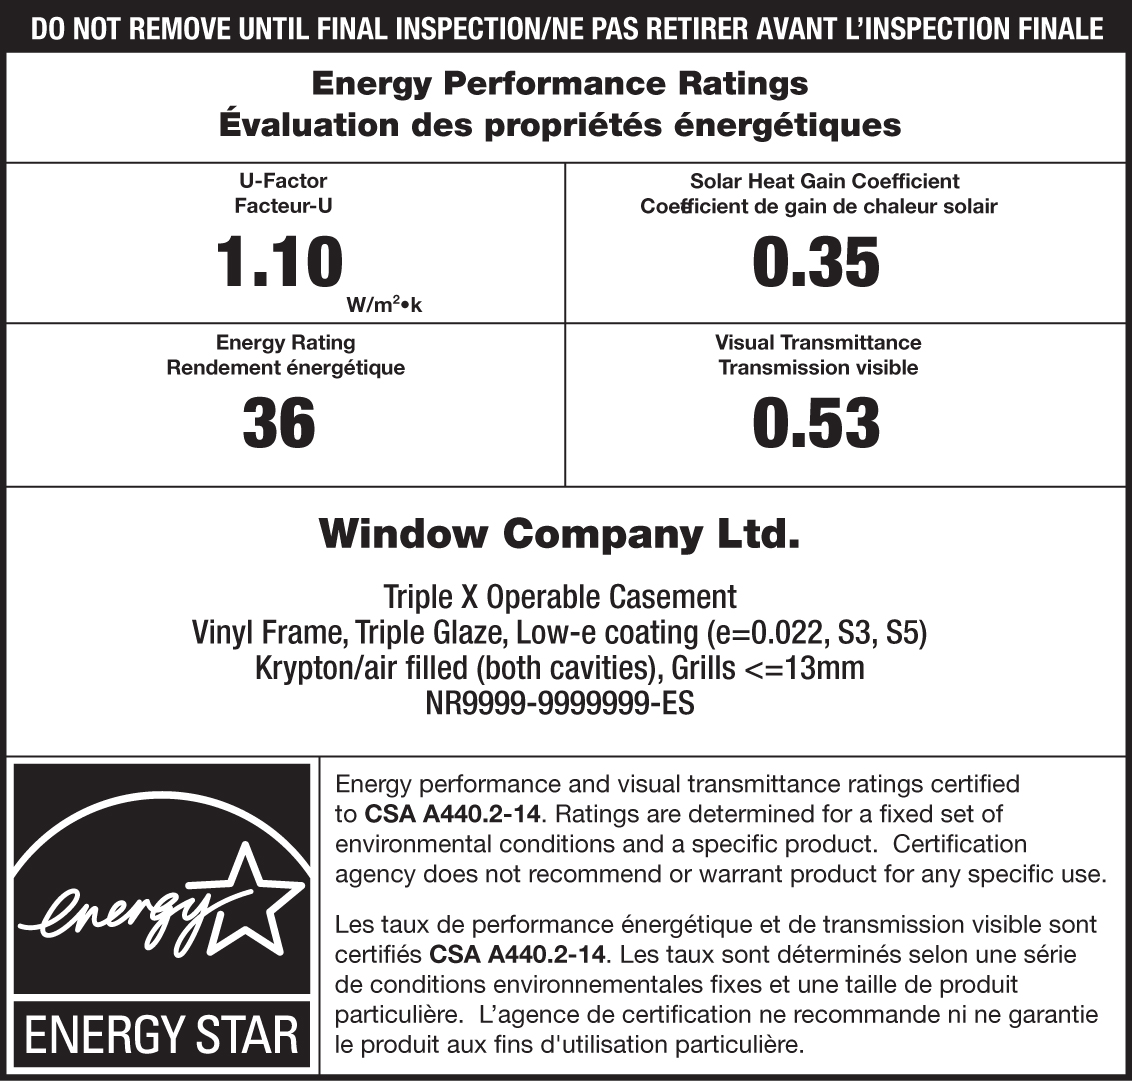 Sample ENERGY STAR / NRCan temporary label for a window. The ENERGY STAR portion has anENERGY STAR certification mark indicating that the product is certified and the product’s specific performance ratings, brand name and model description.